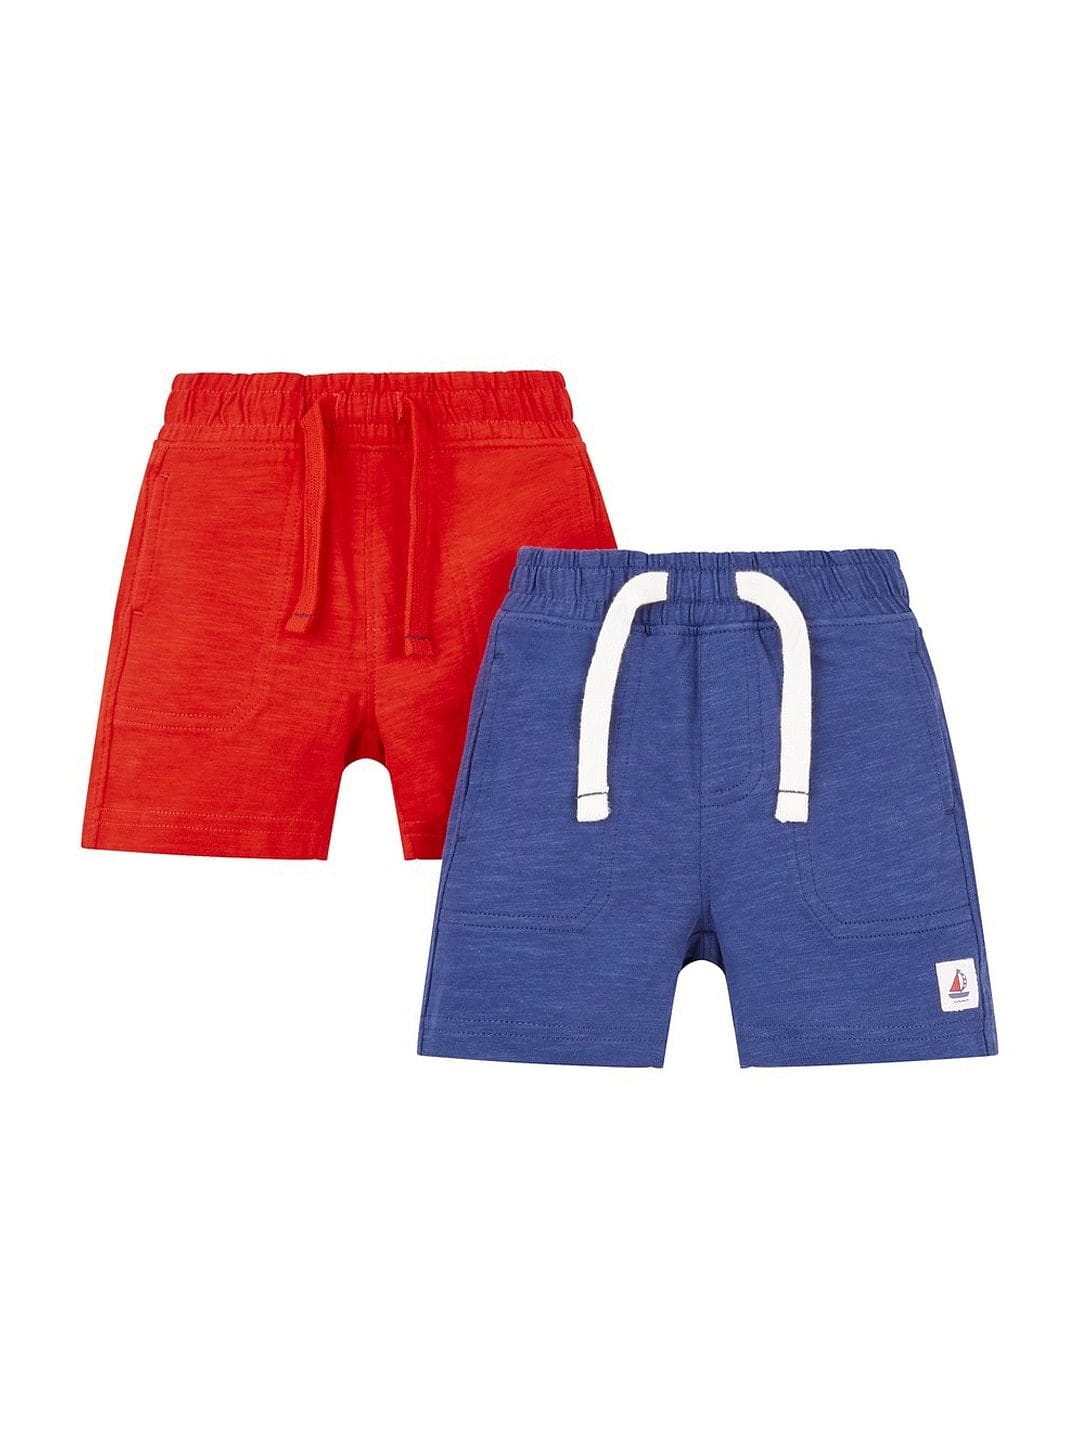 Mothercare | Red And Navy Shorts - 2 Pack 0